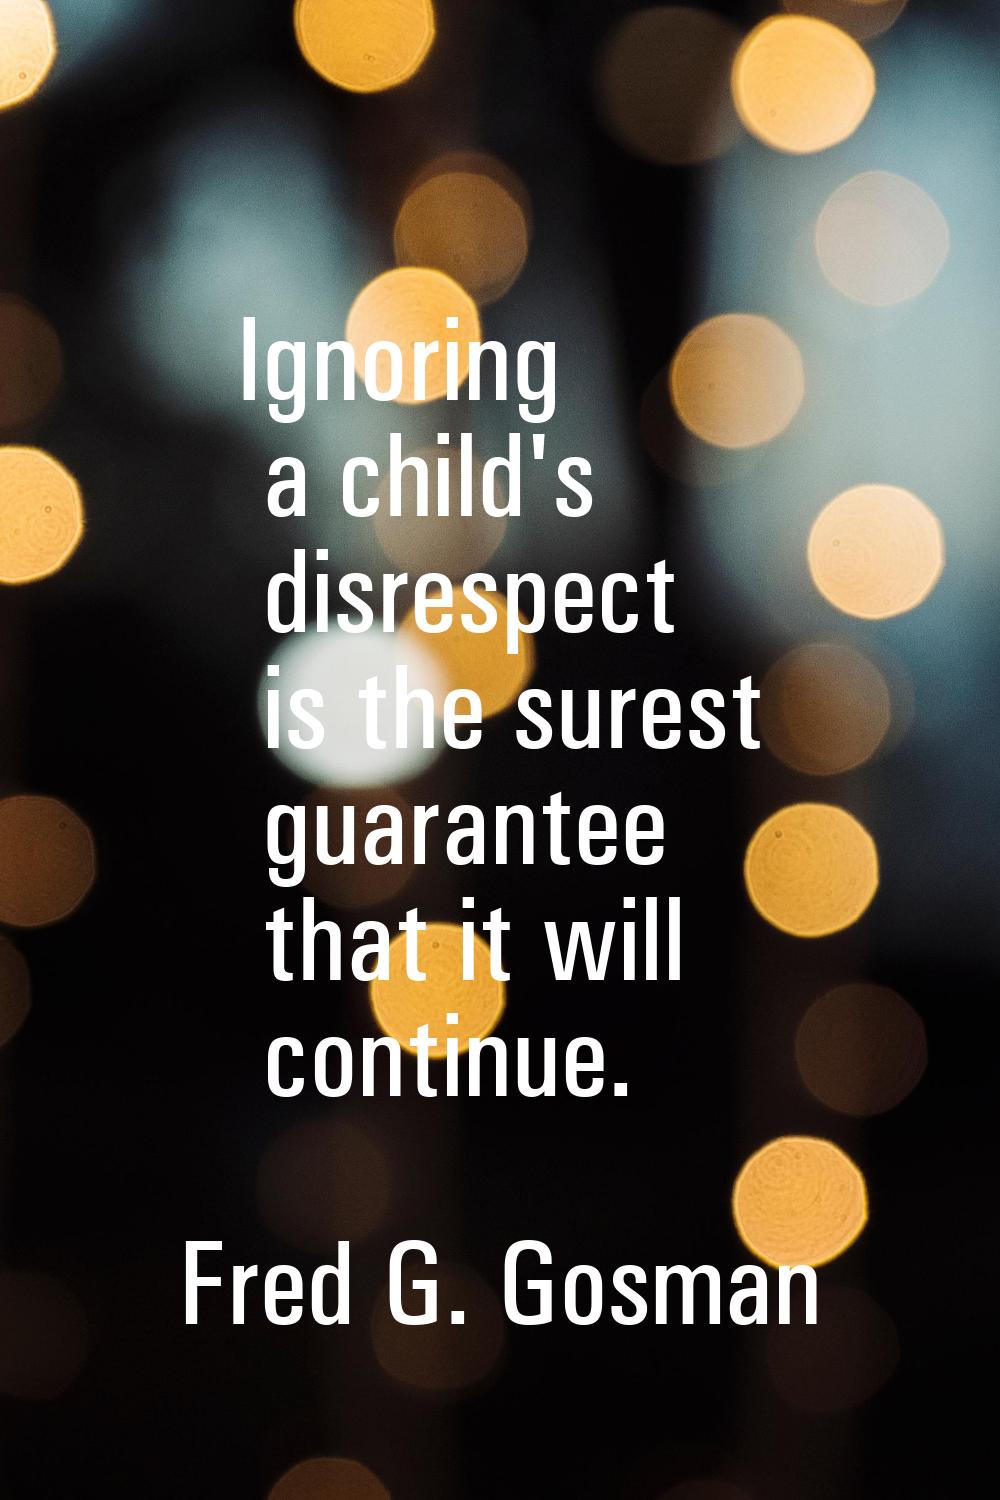 Ignoring a child's disrespect is the surest guarantee that it will continue.